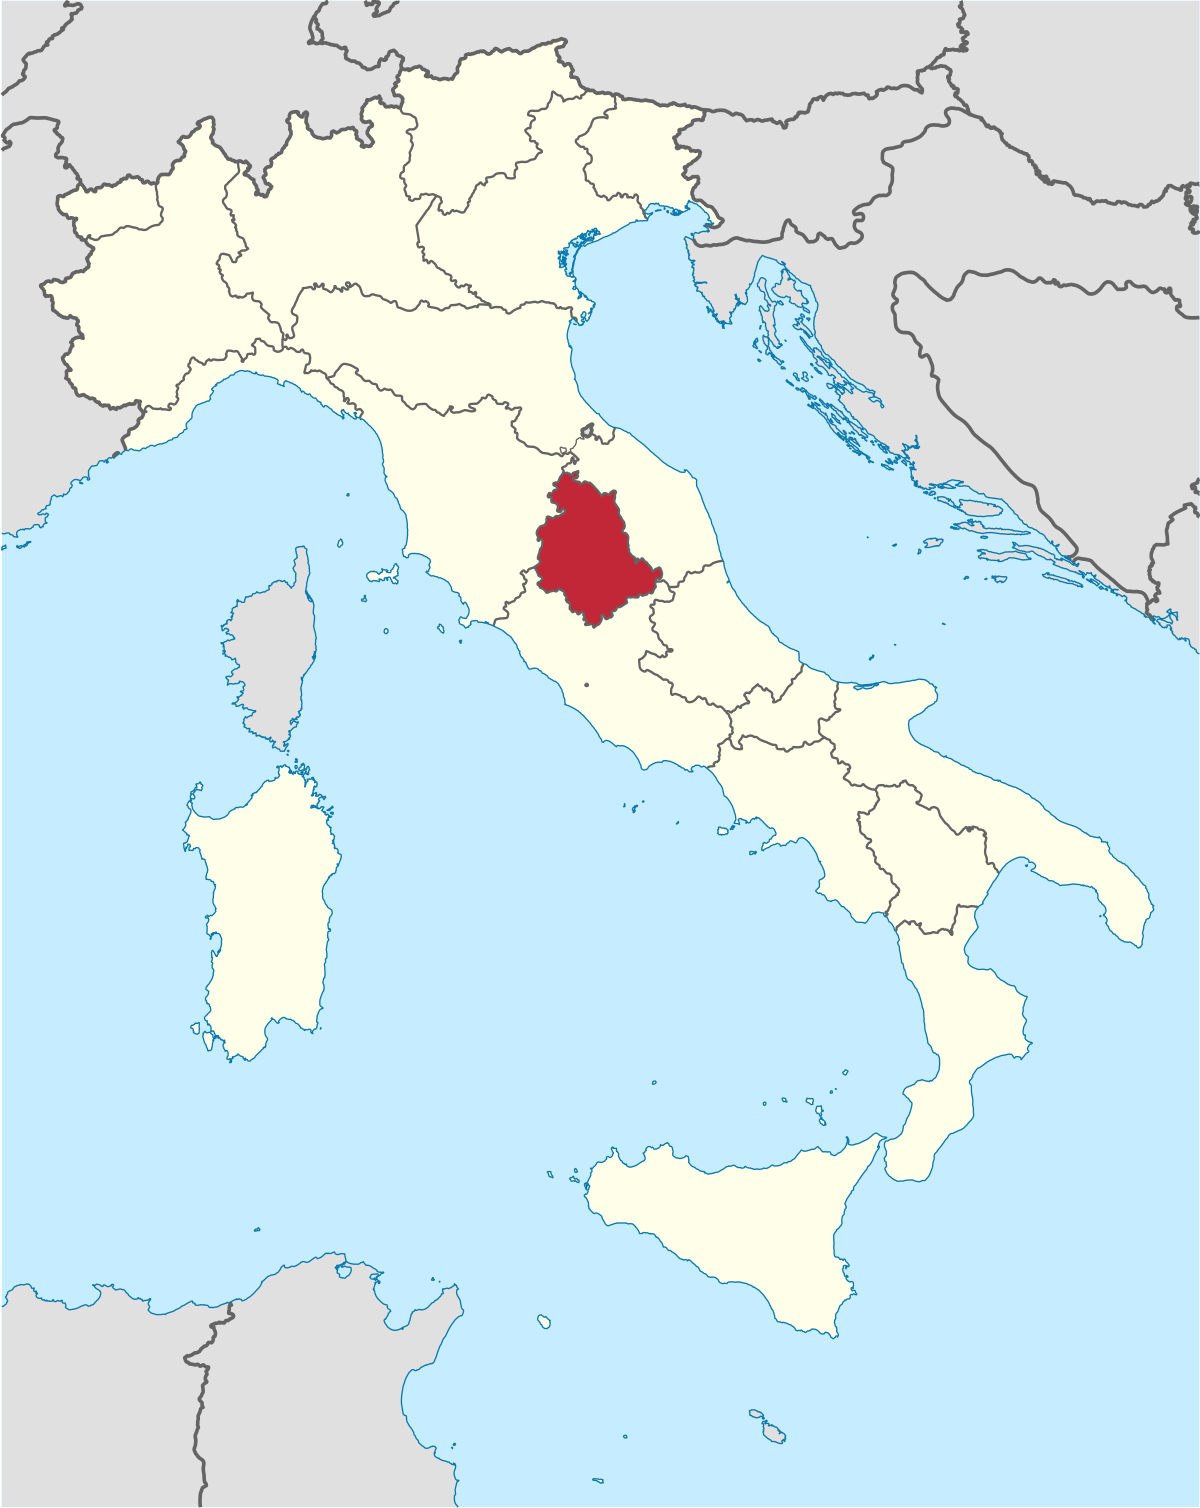 1200px-Umbria_in_Italy.svg.png